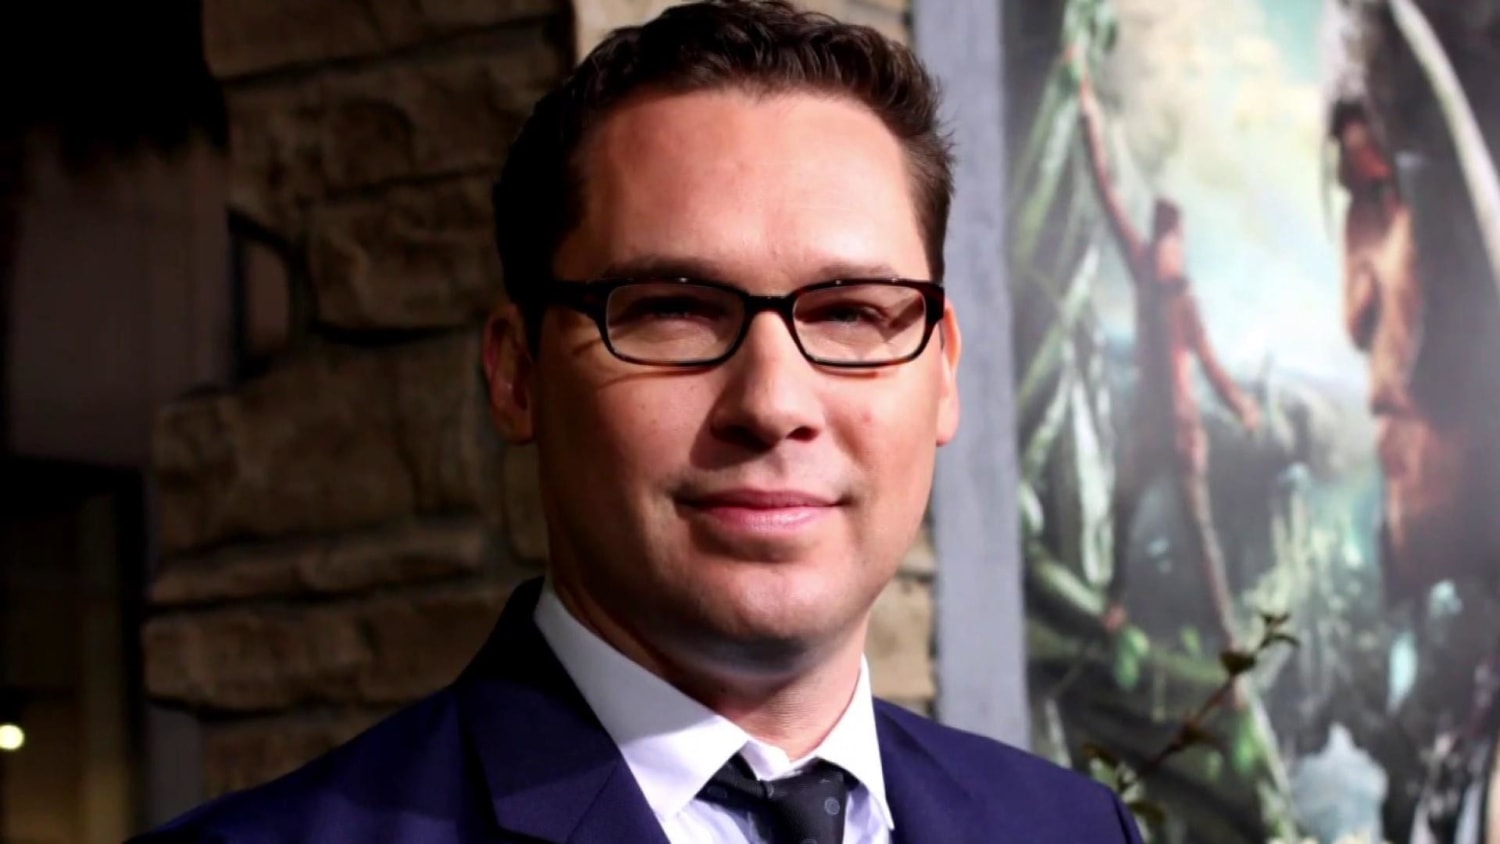 Bryan Singer faces new allegations of sexual misconduct with underage boys